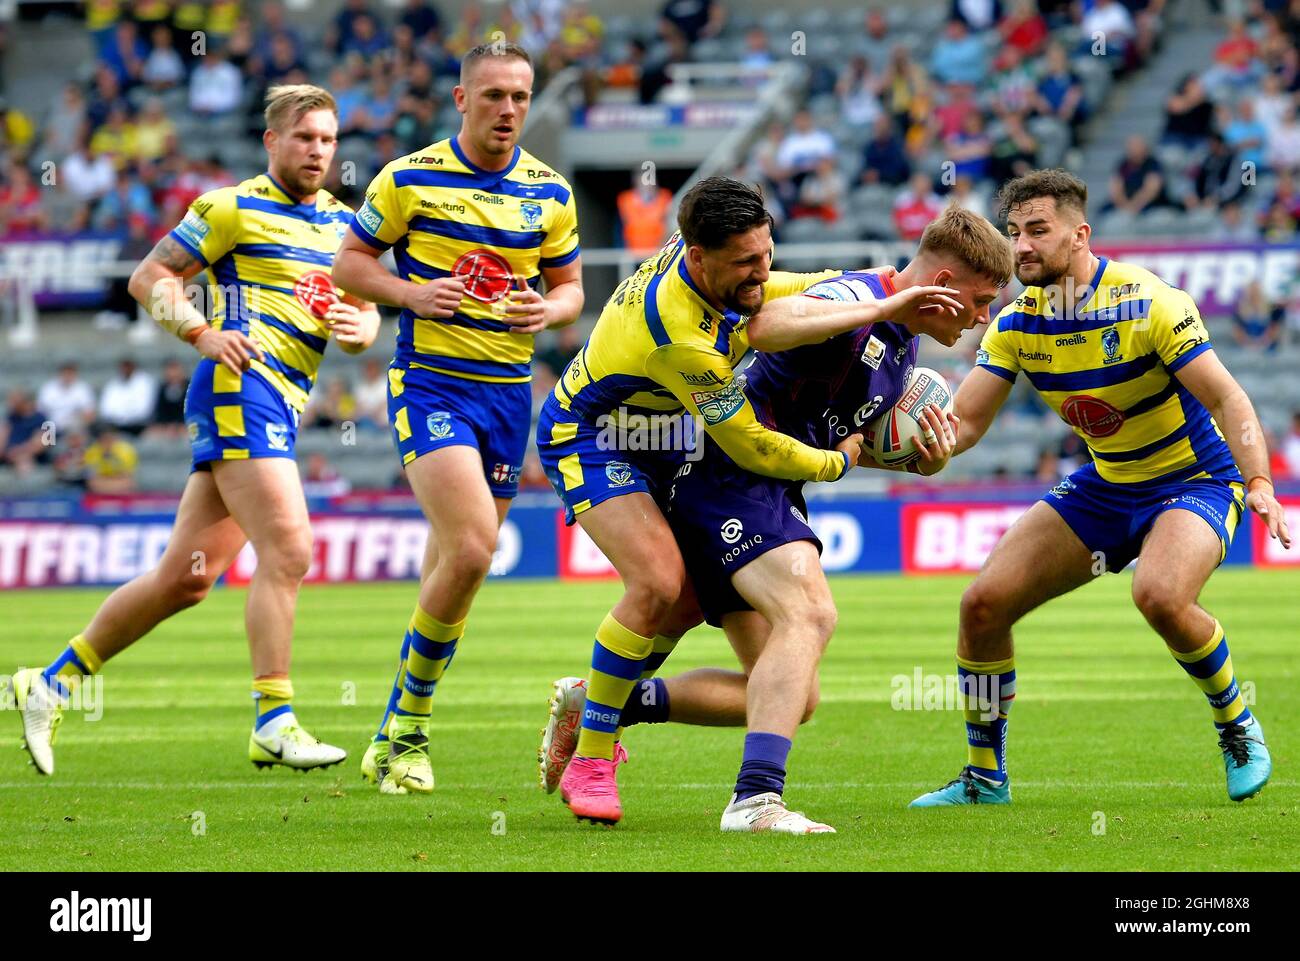 Dacia Magic Weekend Saturday 4th and 5th September 2021, Super League Rugby, Wigan Warriors v Warrington Wolves, St James Park stadium, Newcastle Stock Photo